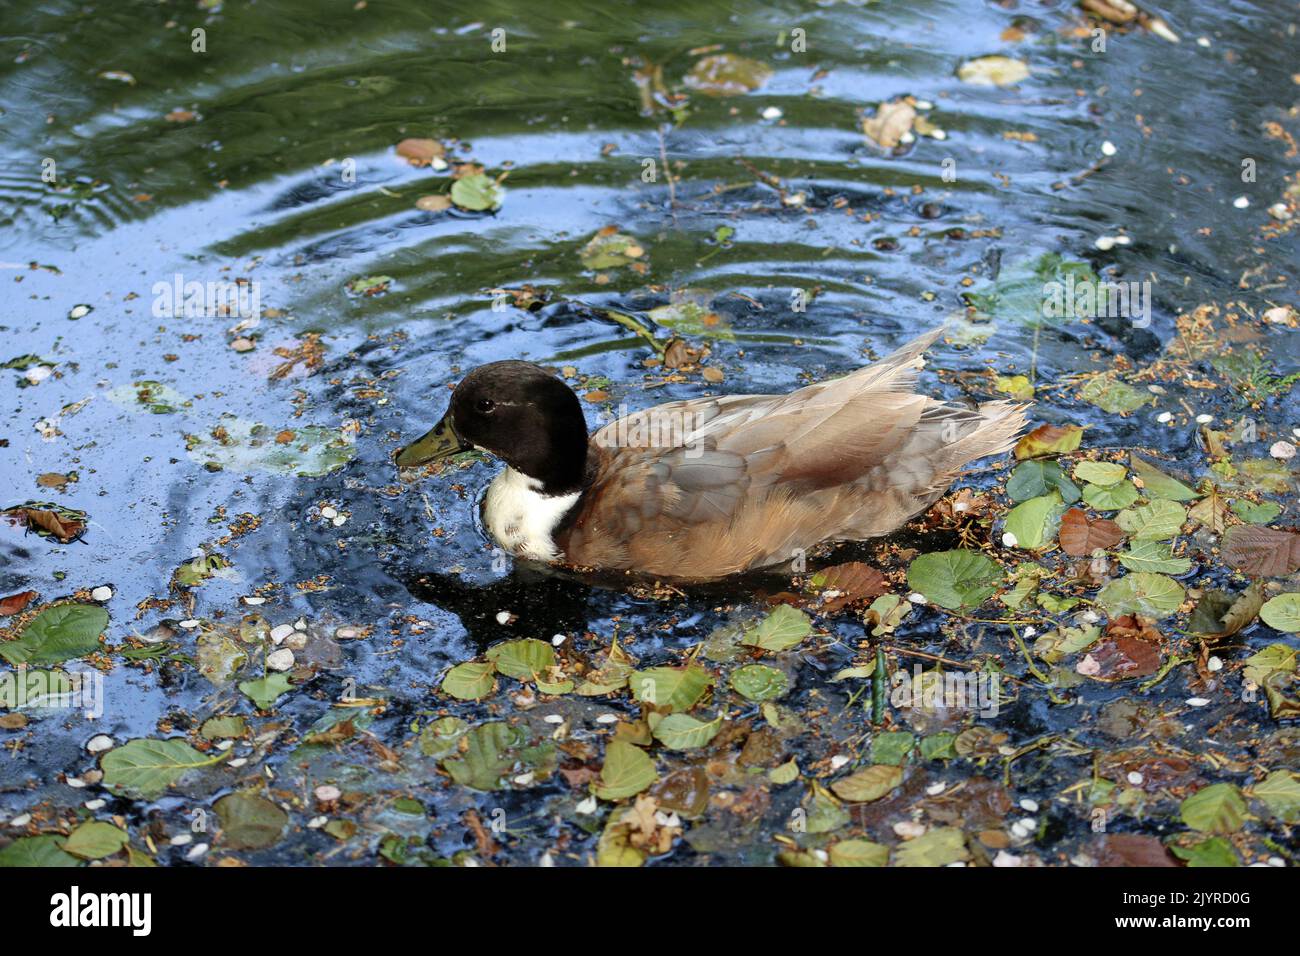 Manky mallard hybrid male duck, Anas platyrhynchos, in close up, swimming on the surface of a pond with a blurred background of open water and leaves. Stock Photo